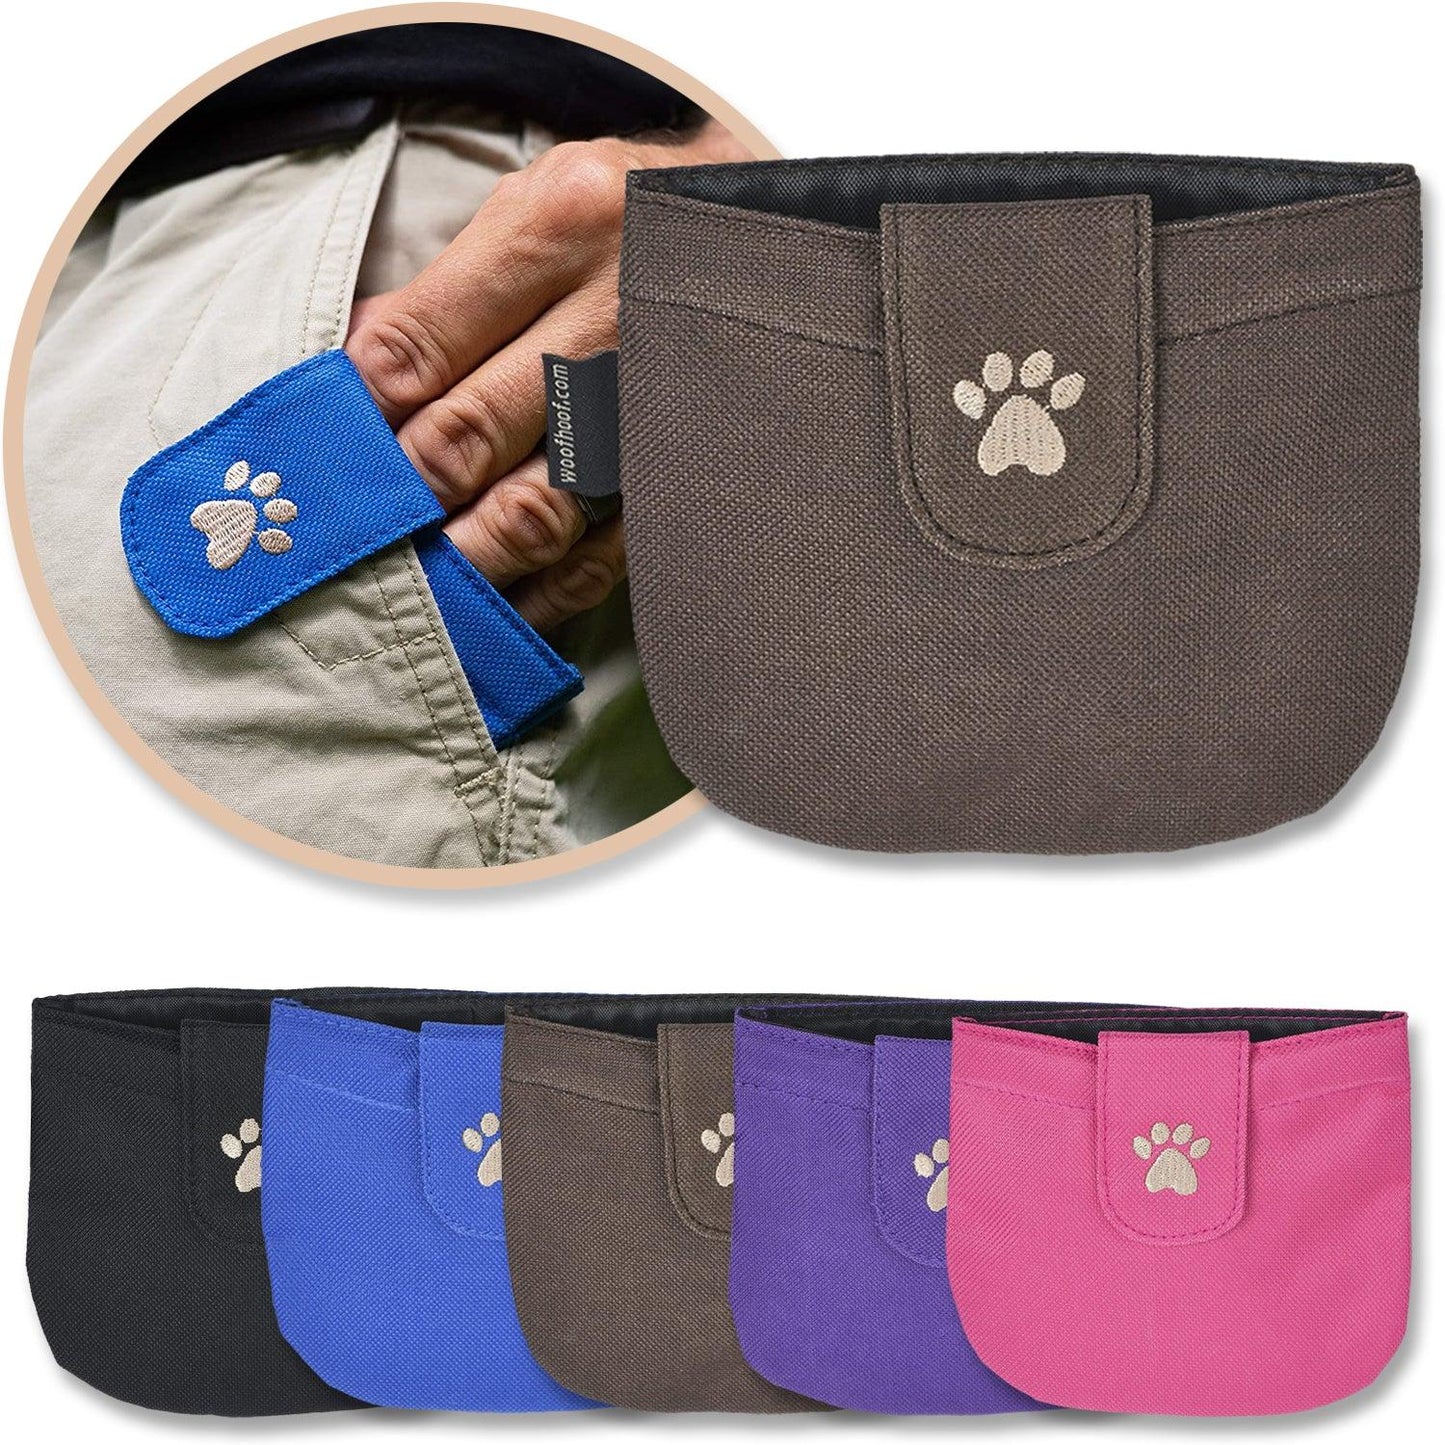 Brown pocket treat pouch shown with a variety of five colors